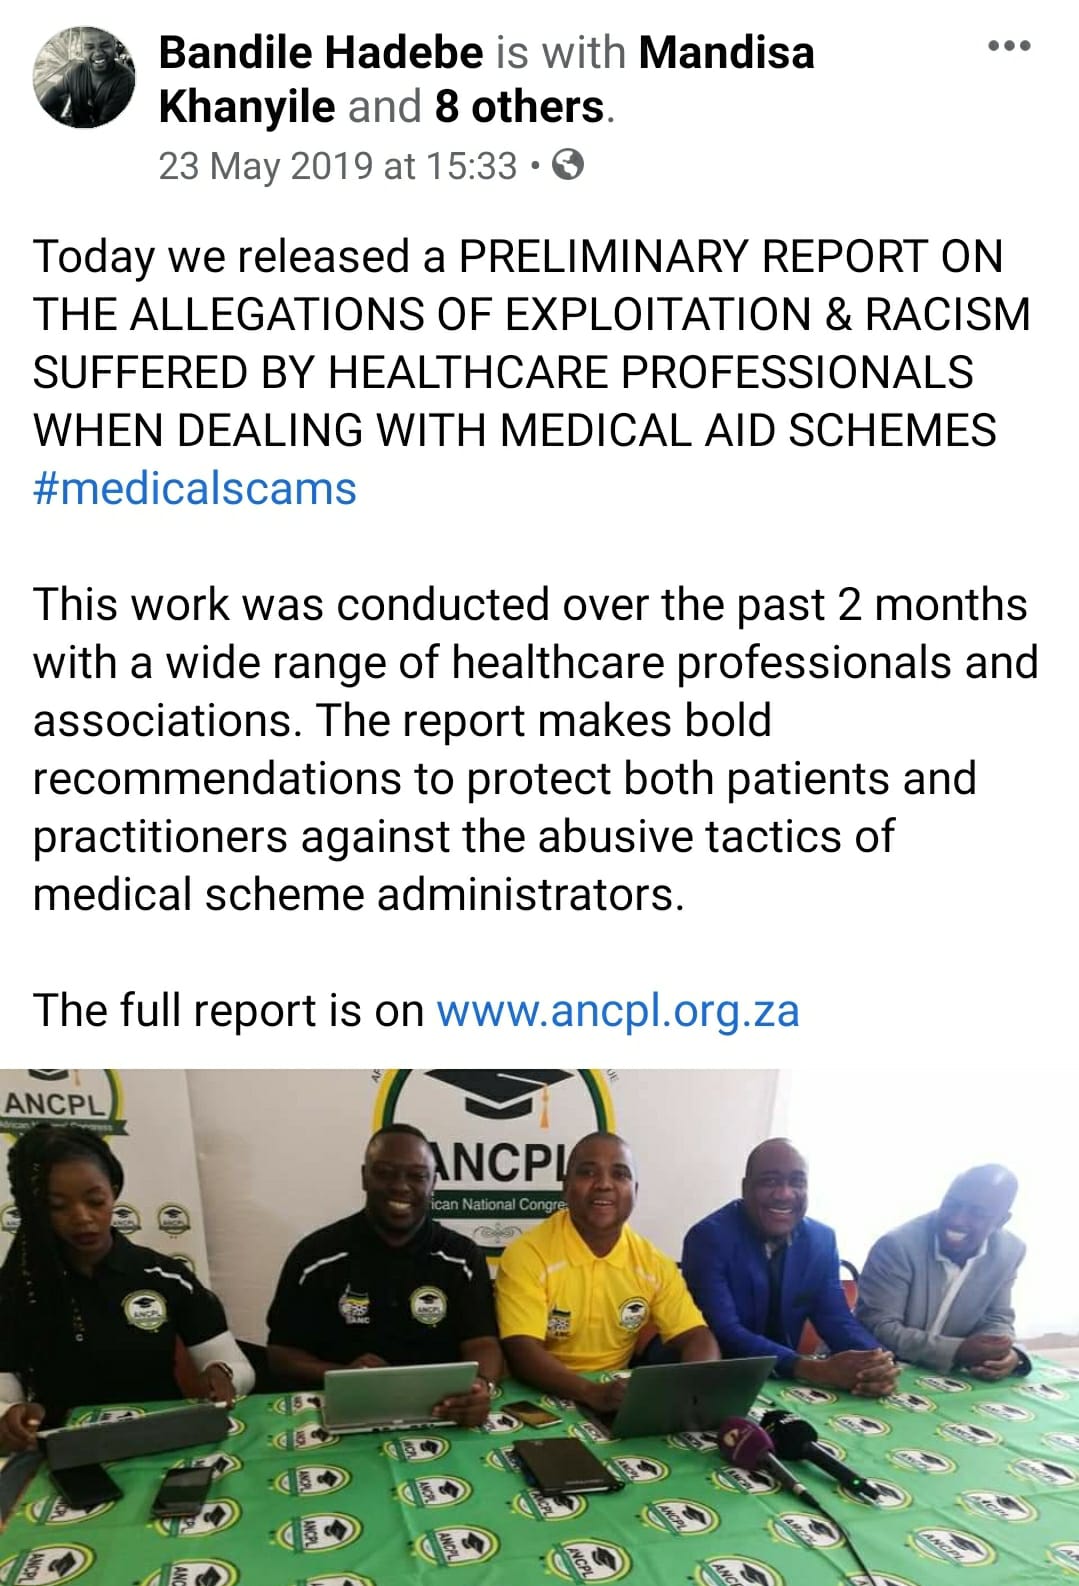 PRELIMINARY REPORT ON THE ALLEGATIONS OF EXPLOITATION & RACISM SUFFERED BY HEALTHCARE PROFESSIONALS WHEN DEALING WITH MEDICAL AID SCHEMES